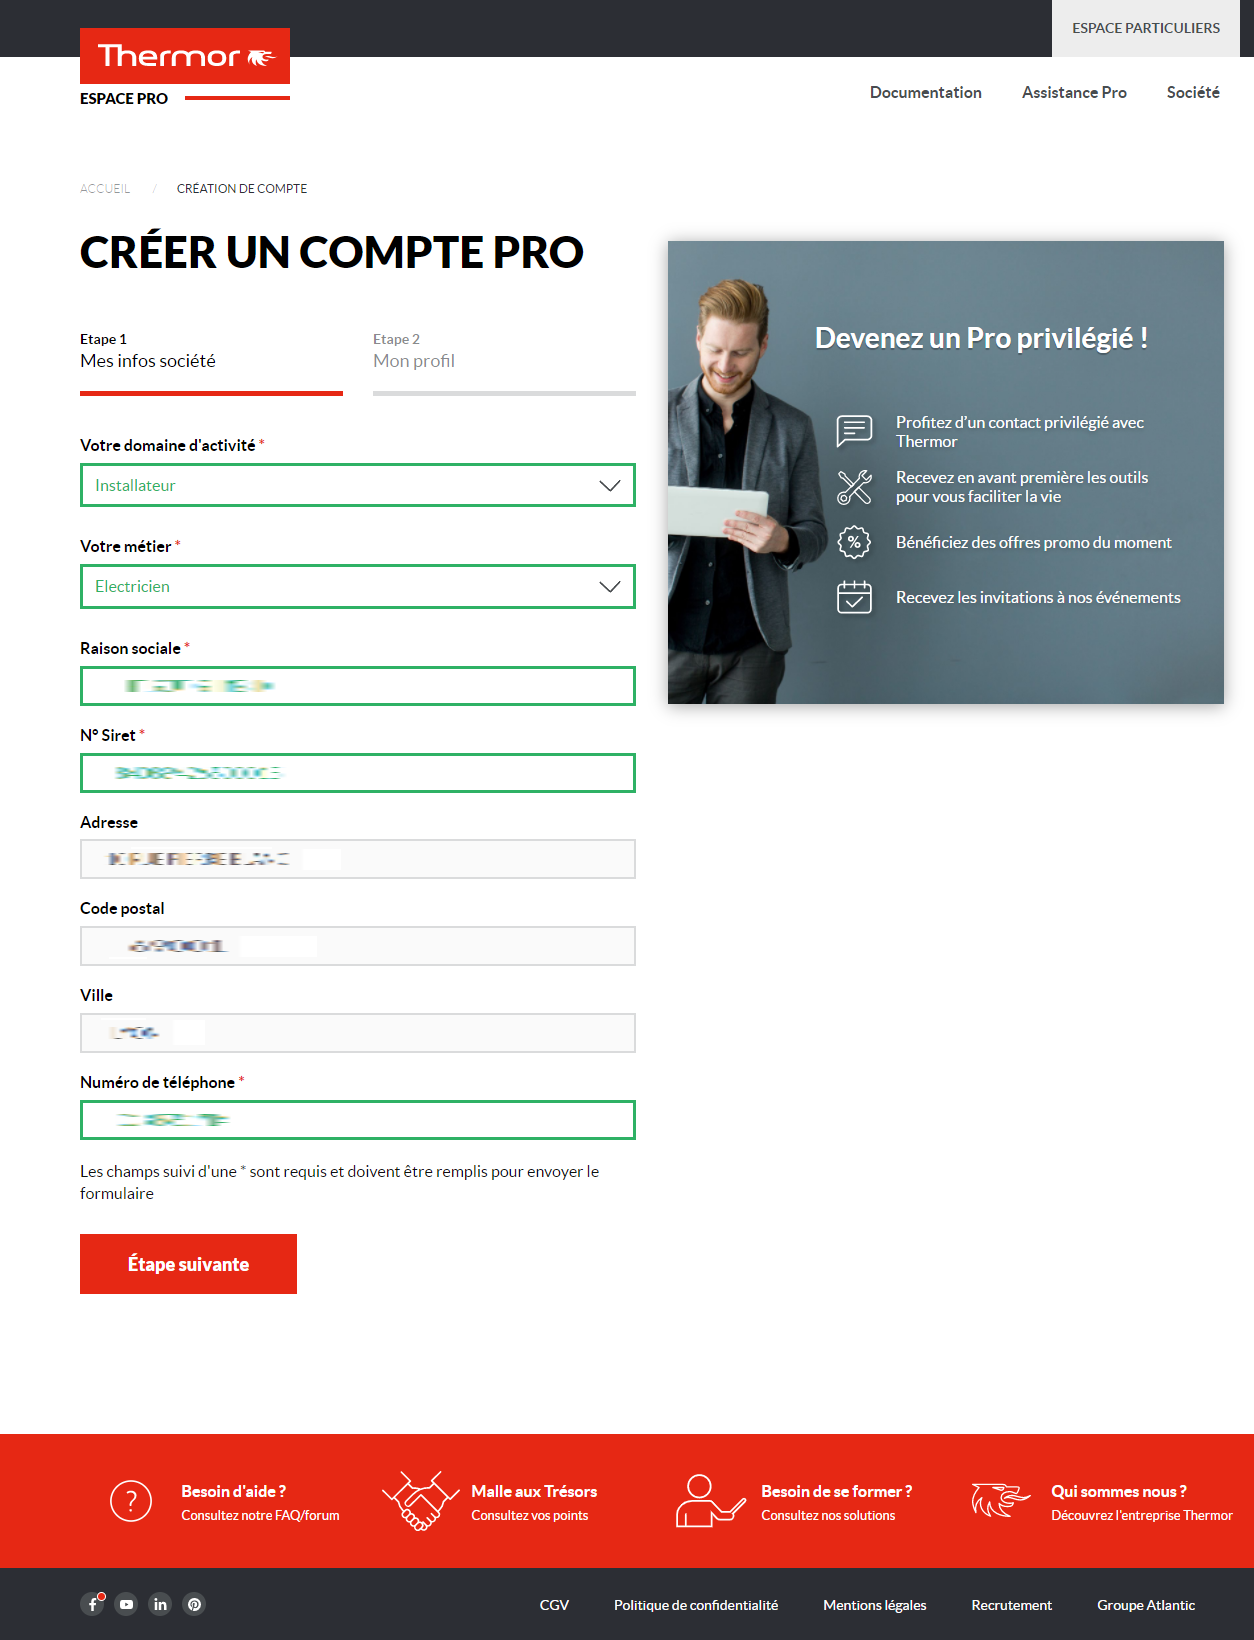 moncomptepro.thermor-pro.fr_register_account.png